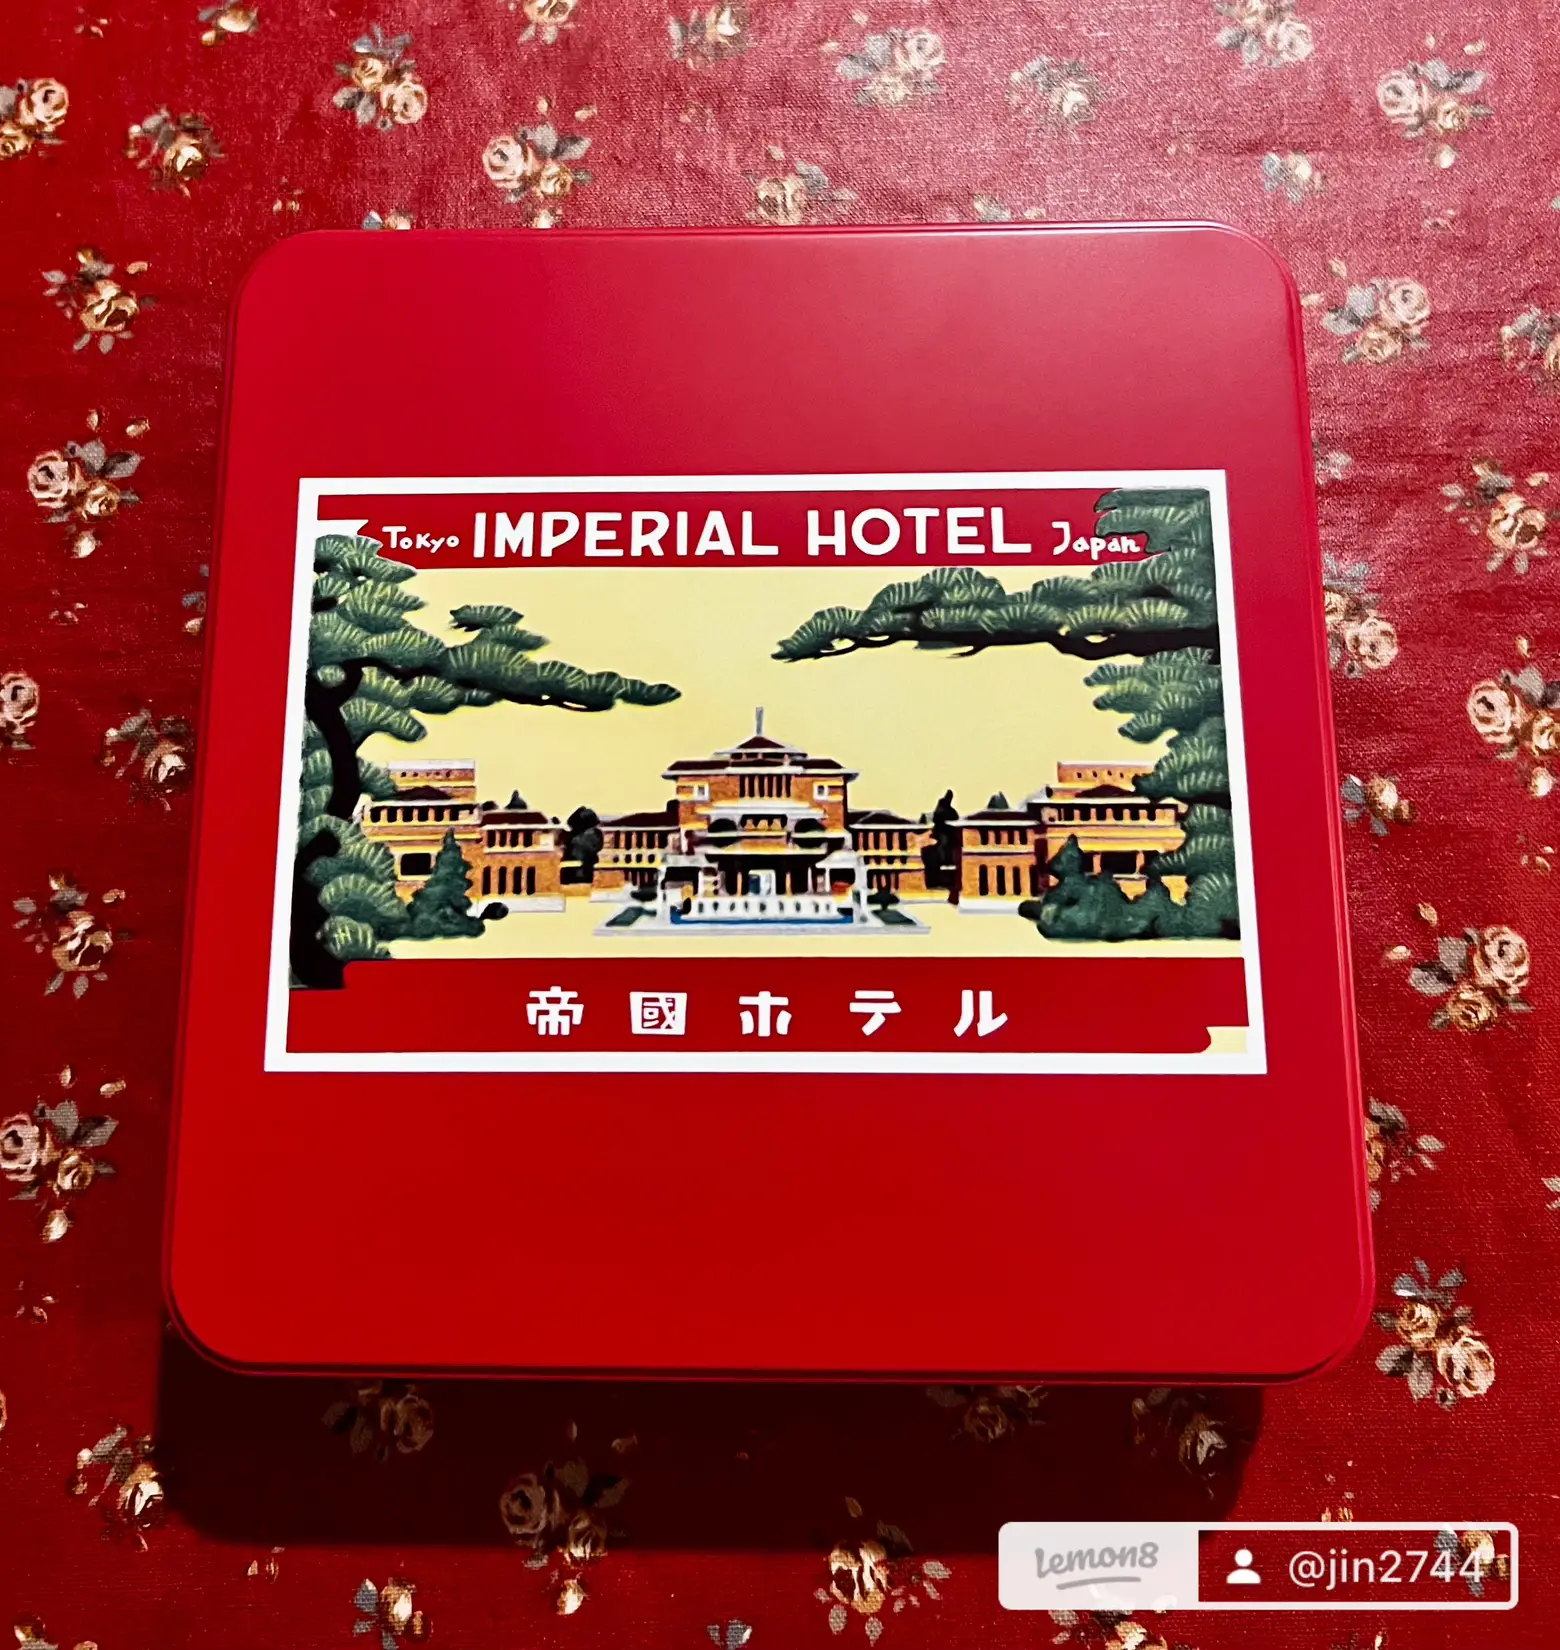 Imperial Hotel Tokyo Light Hall 100th Anniversary Cookie